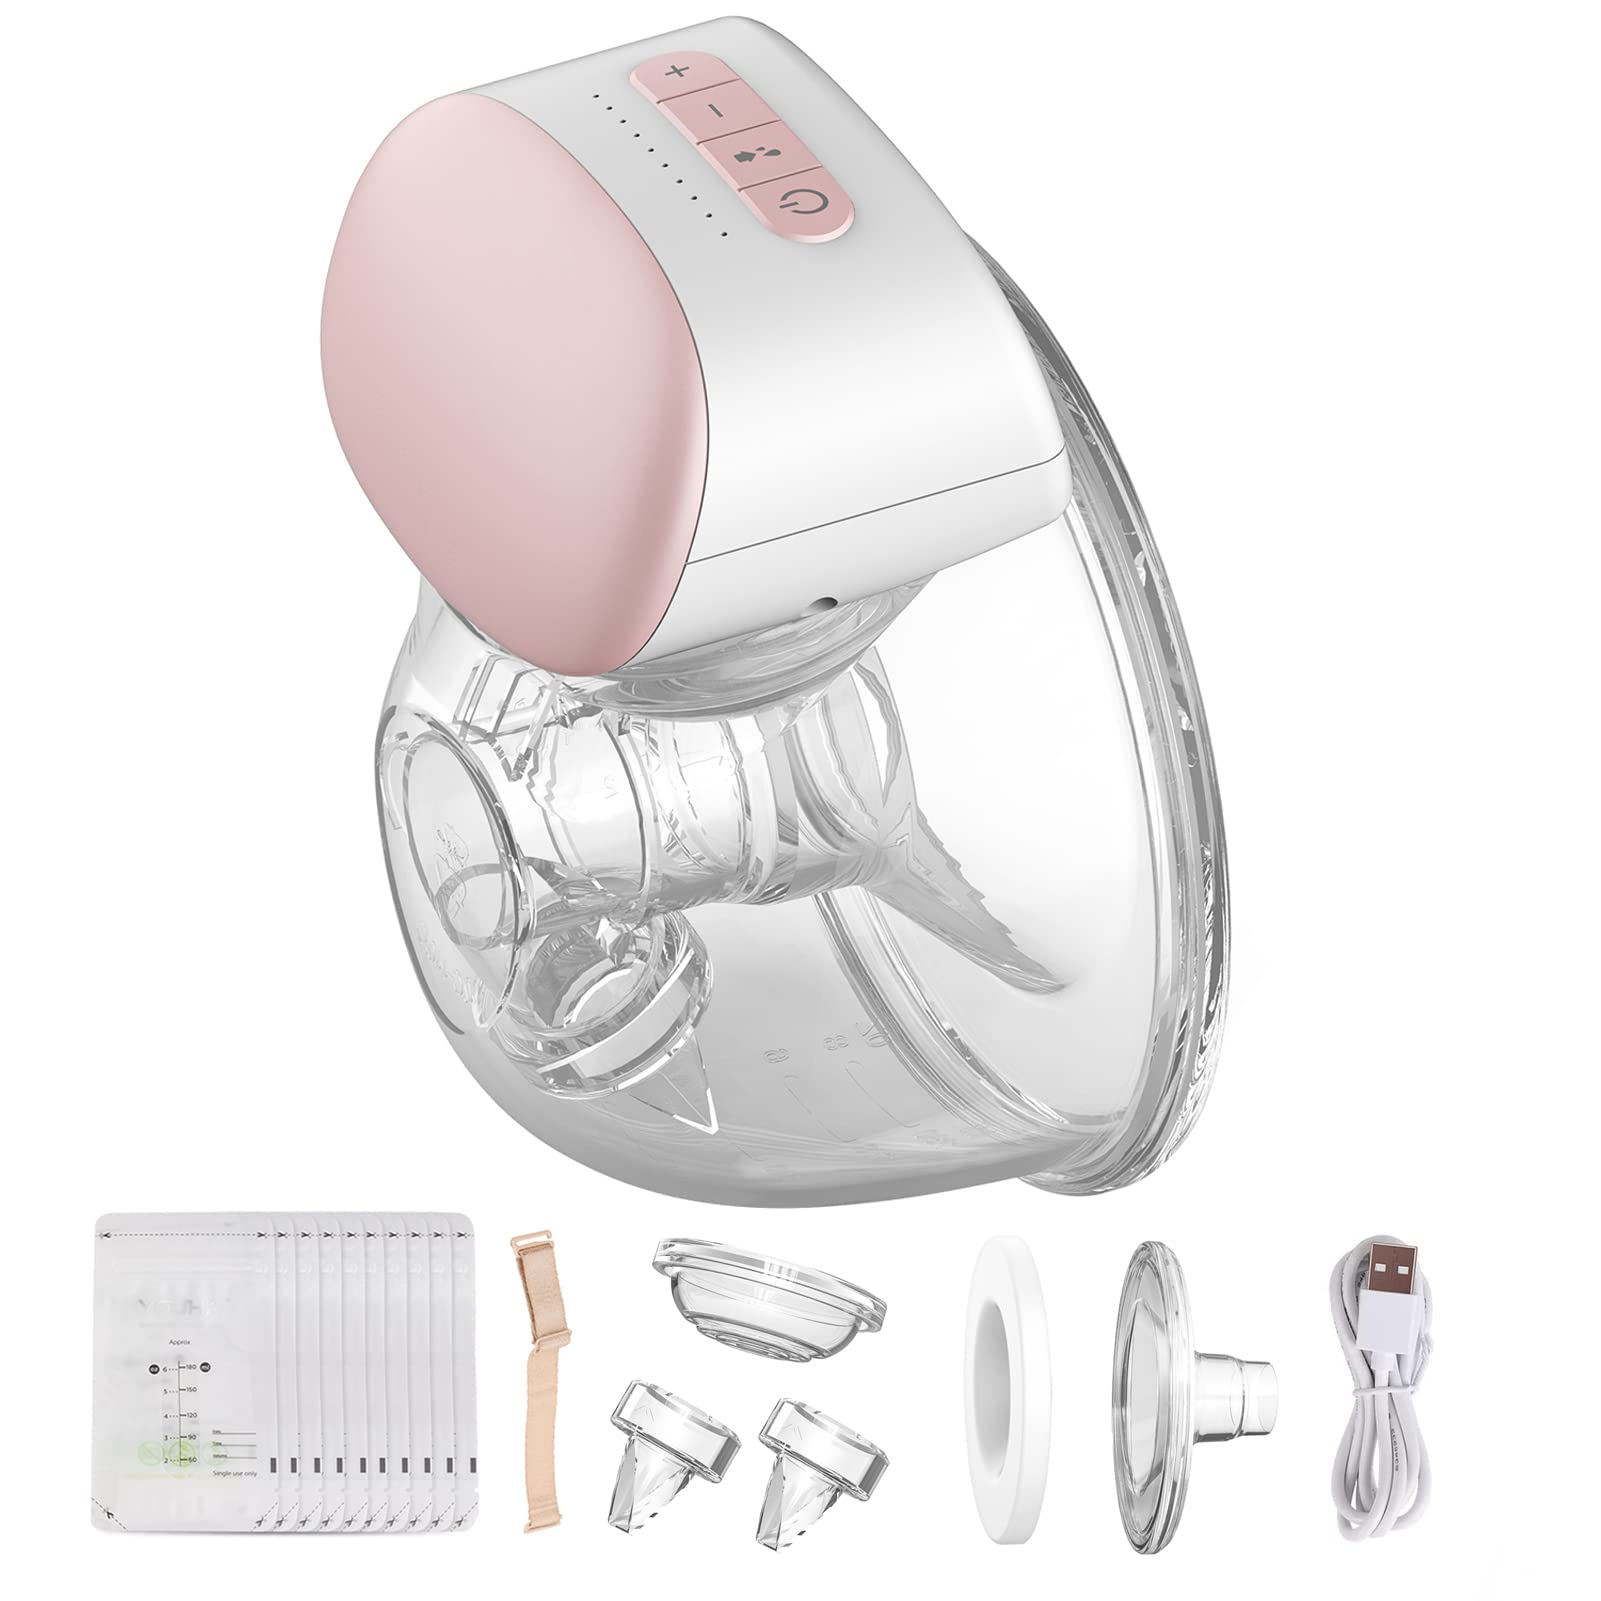 Morelian Wearable Electric Breast Pump Hands Free Portable Breast Cup 8oz/240ml BPA-free 3 Modes 10 Suction Levels with 24mm Flange + 1pcs Bra Adjustment Buckles + 10pcs Breastmilk Storage Bags